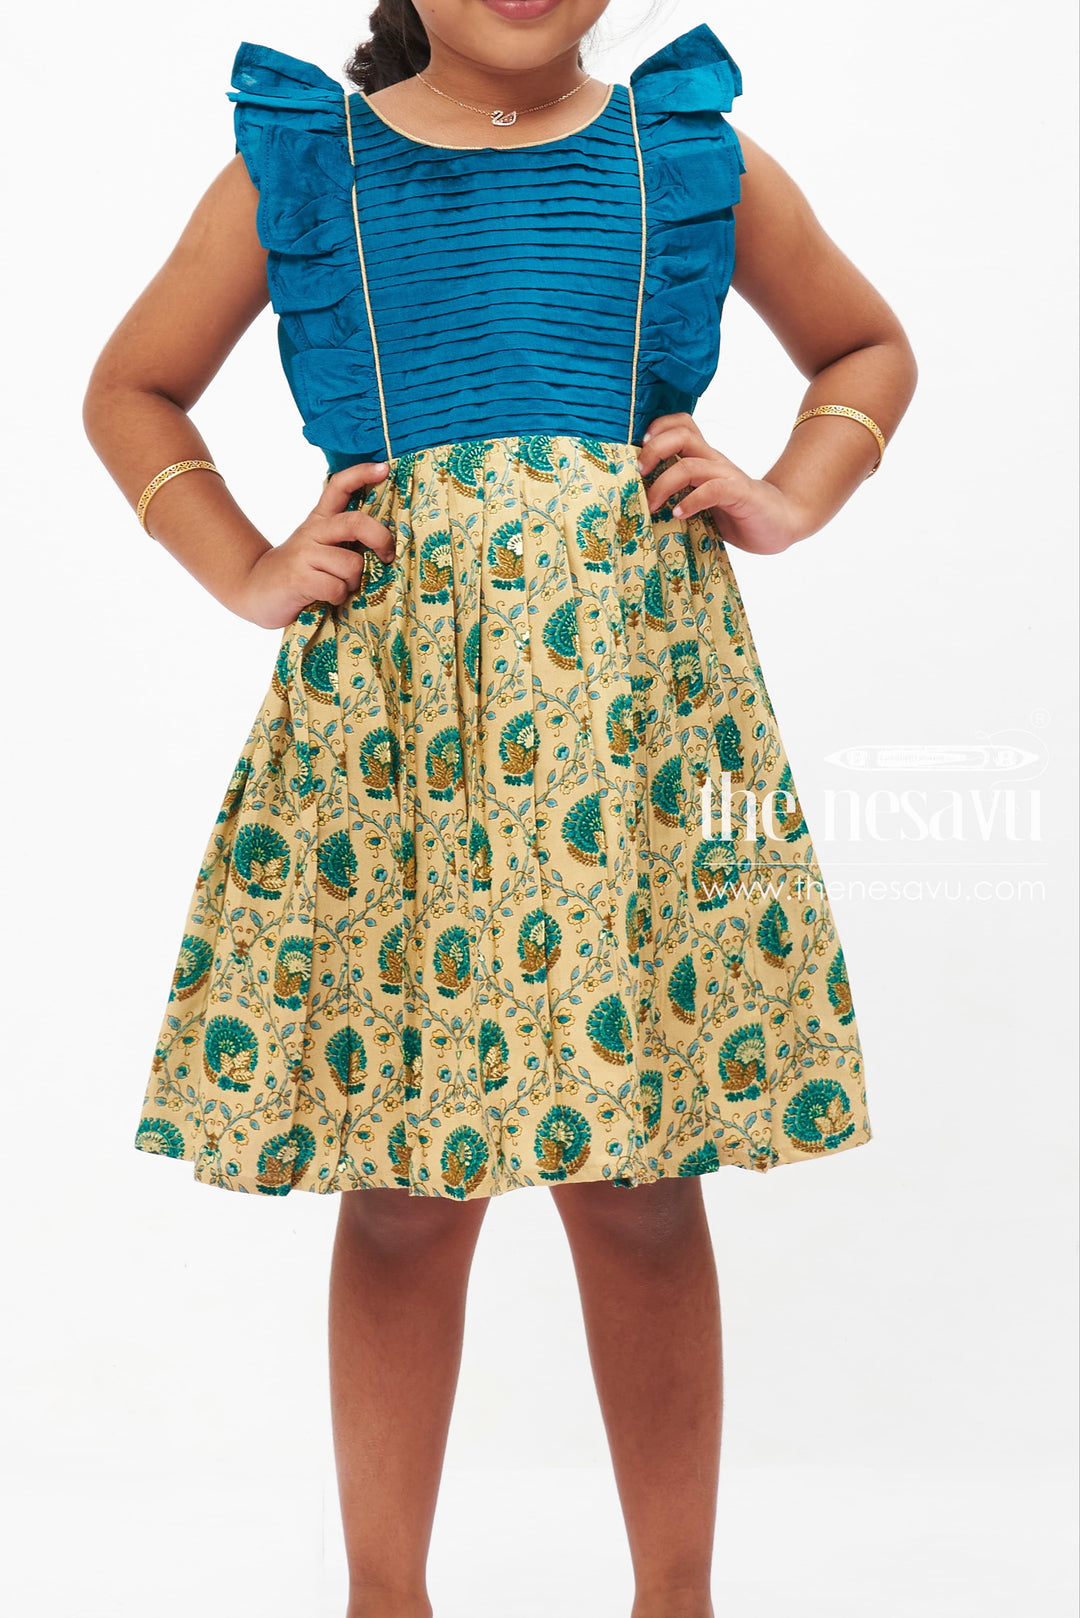 The Nesavu Baby Cotton Frocks Teal Blue and Beige Traditional Peacock Printed Baby Frock for Girls Nesavu Girls Teal Peacock Print Festive Dress | Baby Frock for little Girls | The Nesavu